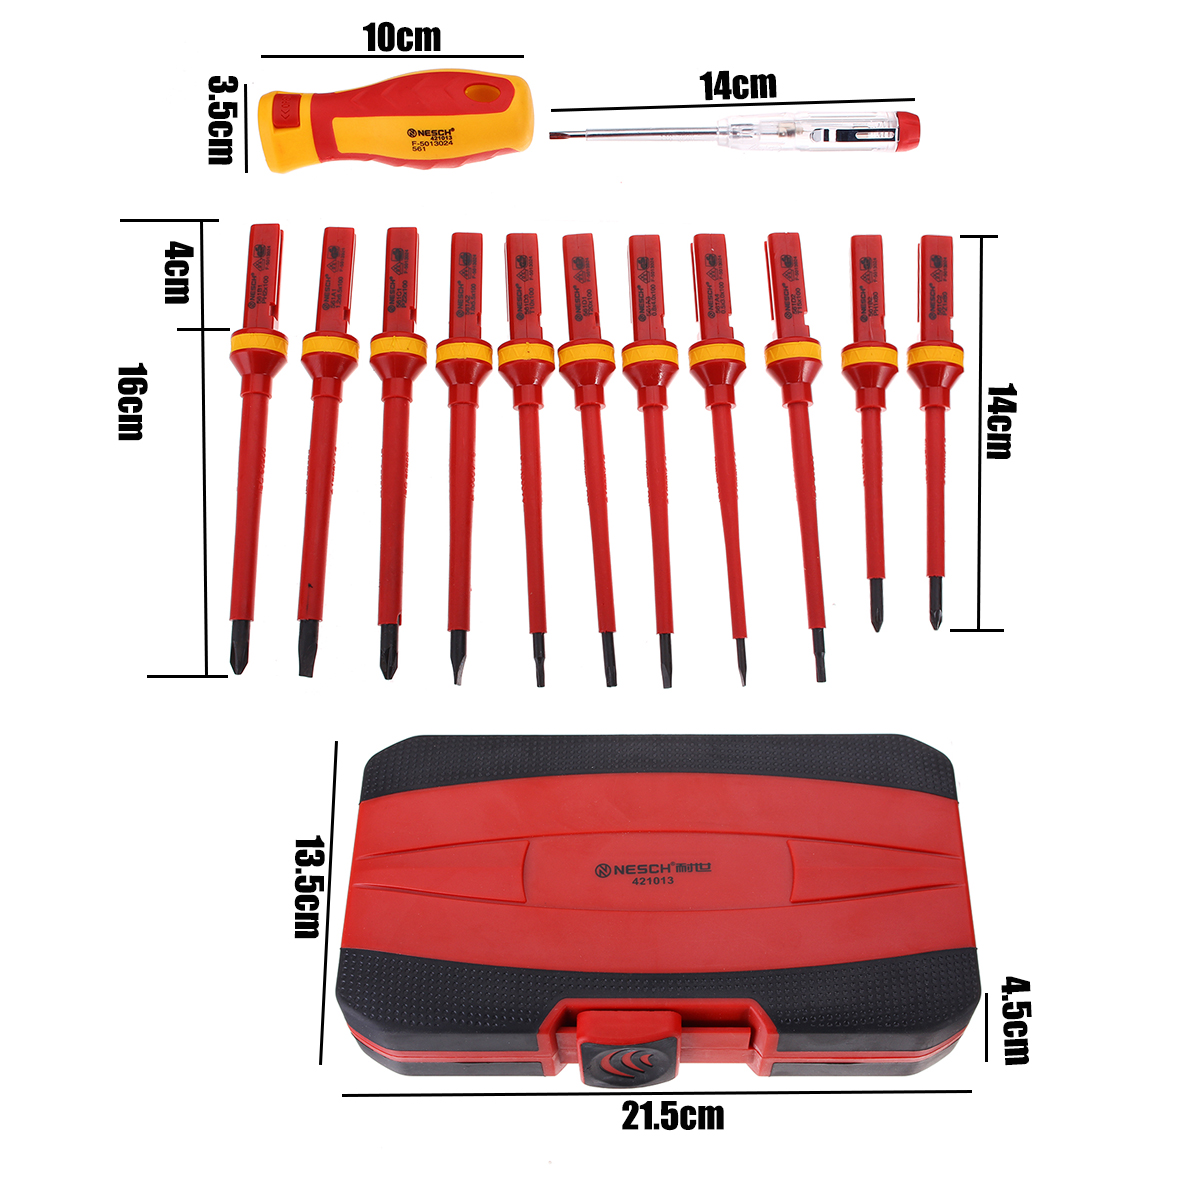 13Pcs-1000V-Electronic-Insulated-Screwdriver-Set-Phillips-Slotted-Torx-CR-V-Screwdriver-Repair-Tools-1423100